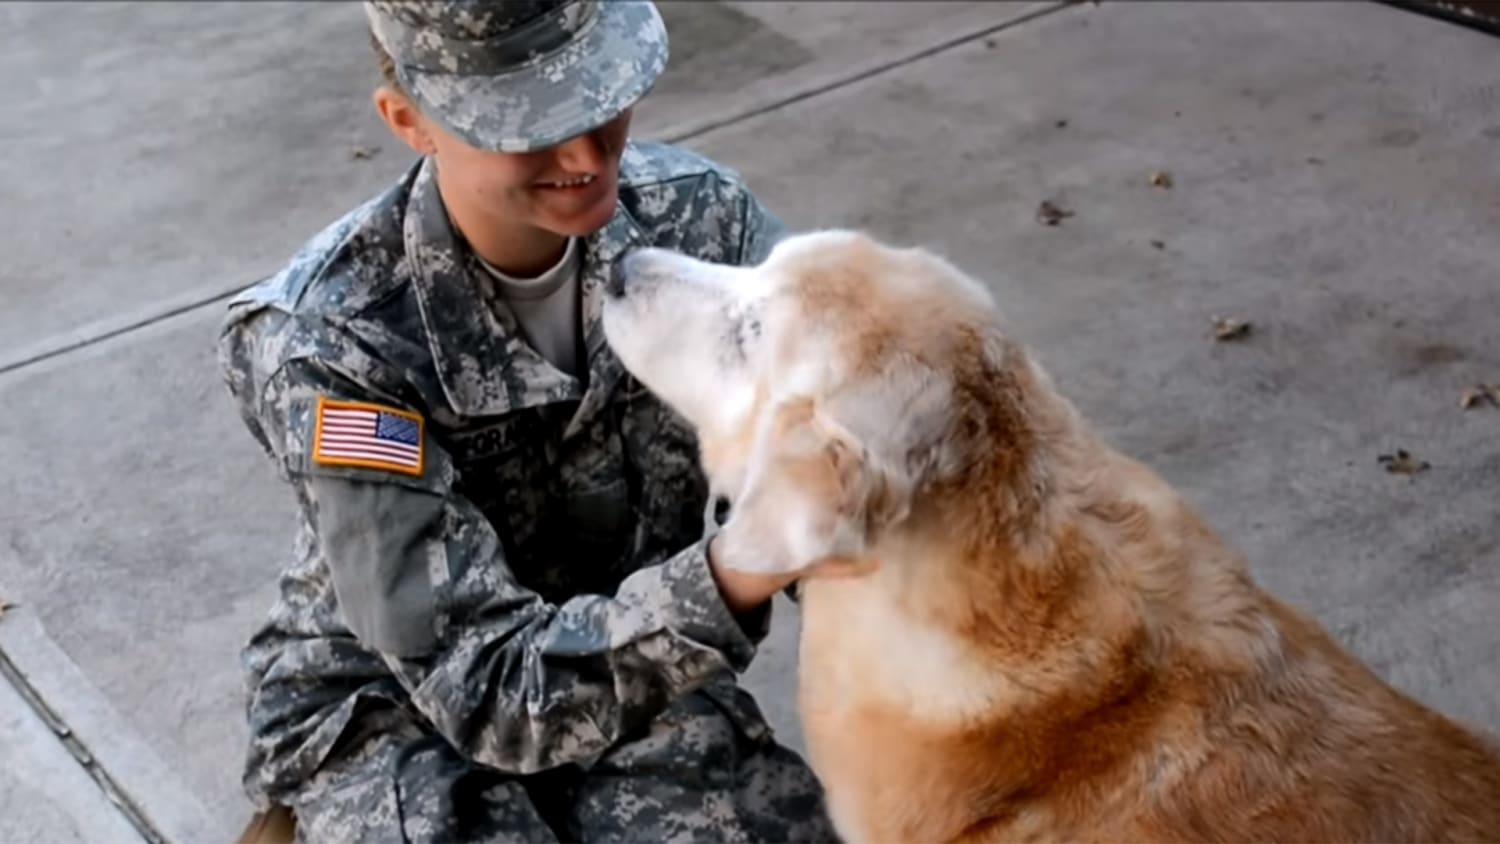 Home from basic training, soldier reunites with 13-year-old dog in  heartwarming video